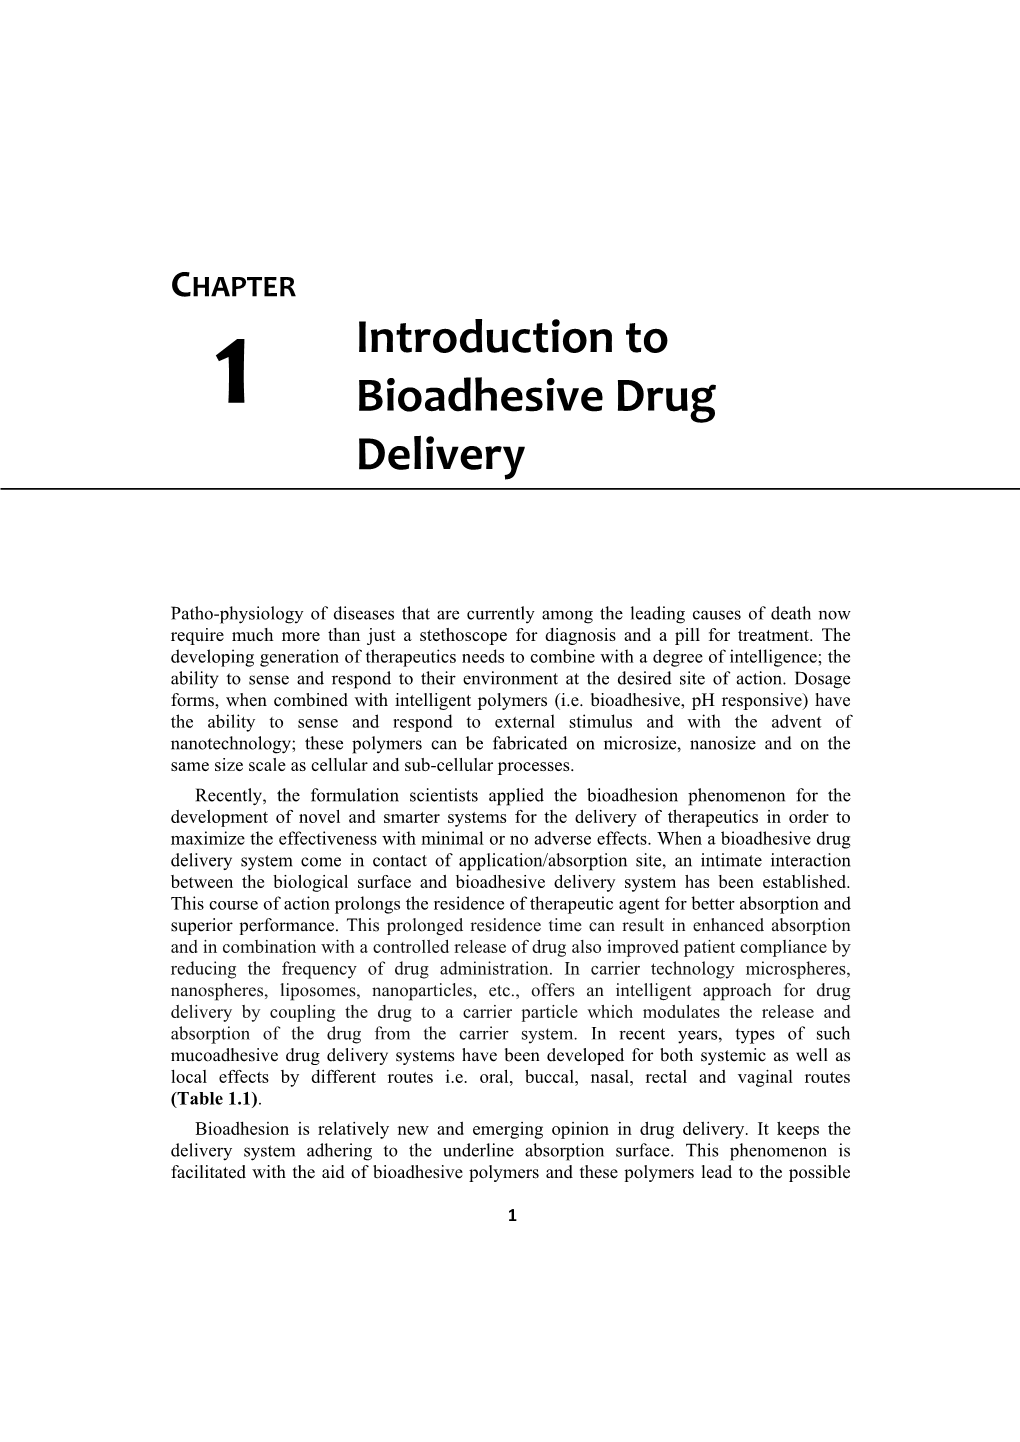 Introduction to Bioadhesive Drug Delivery 3